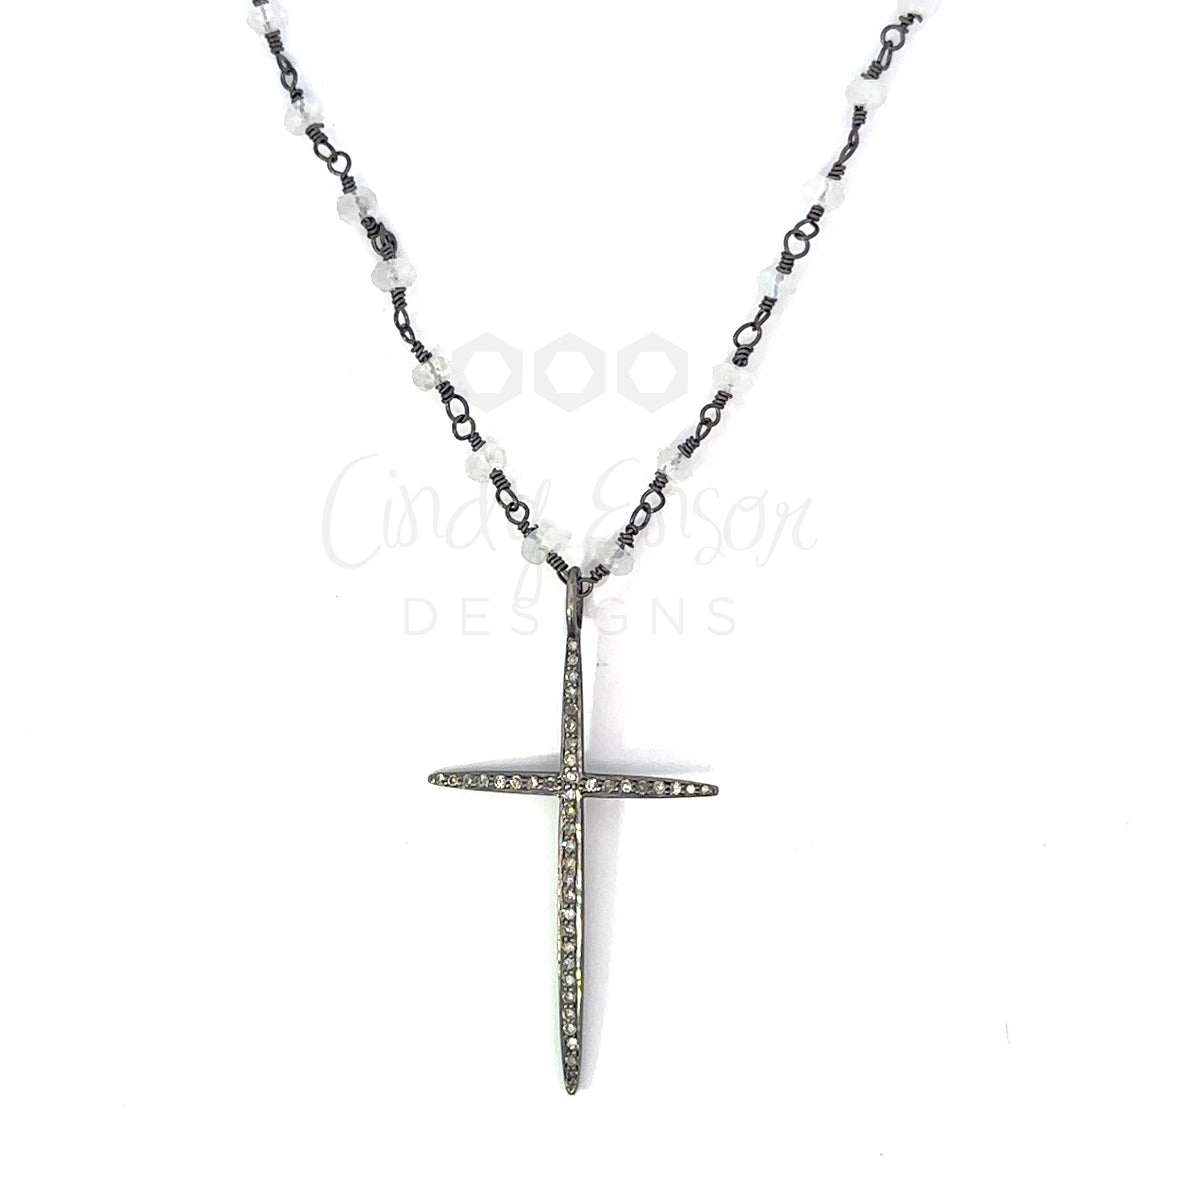 Short Moonstone Necklace with Medium Pave Cross